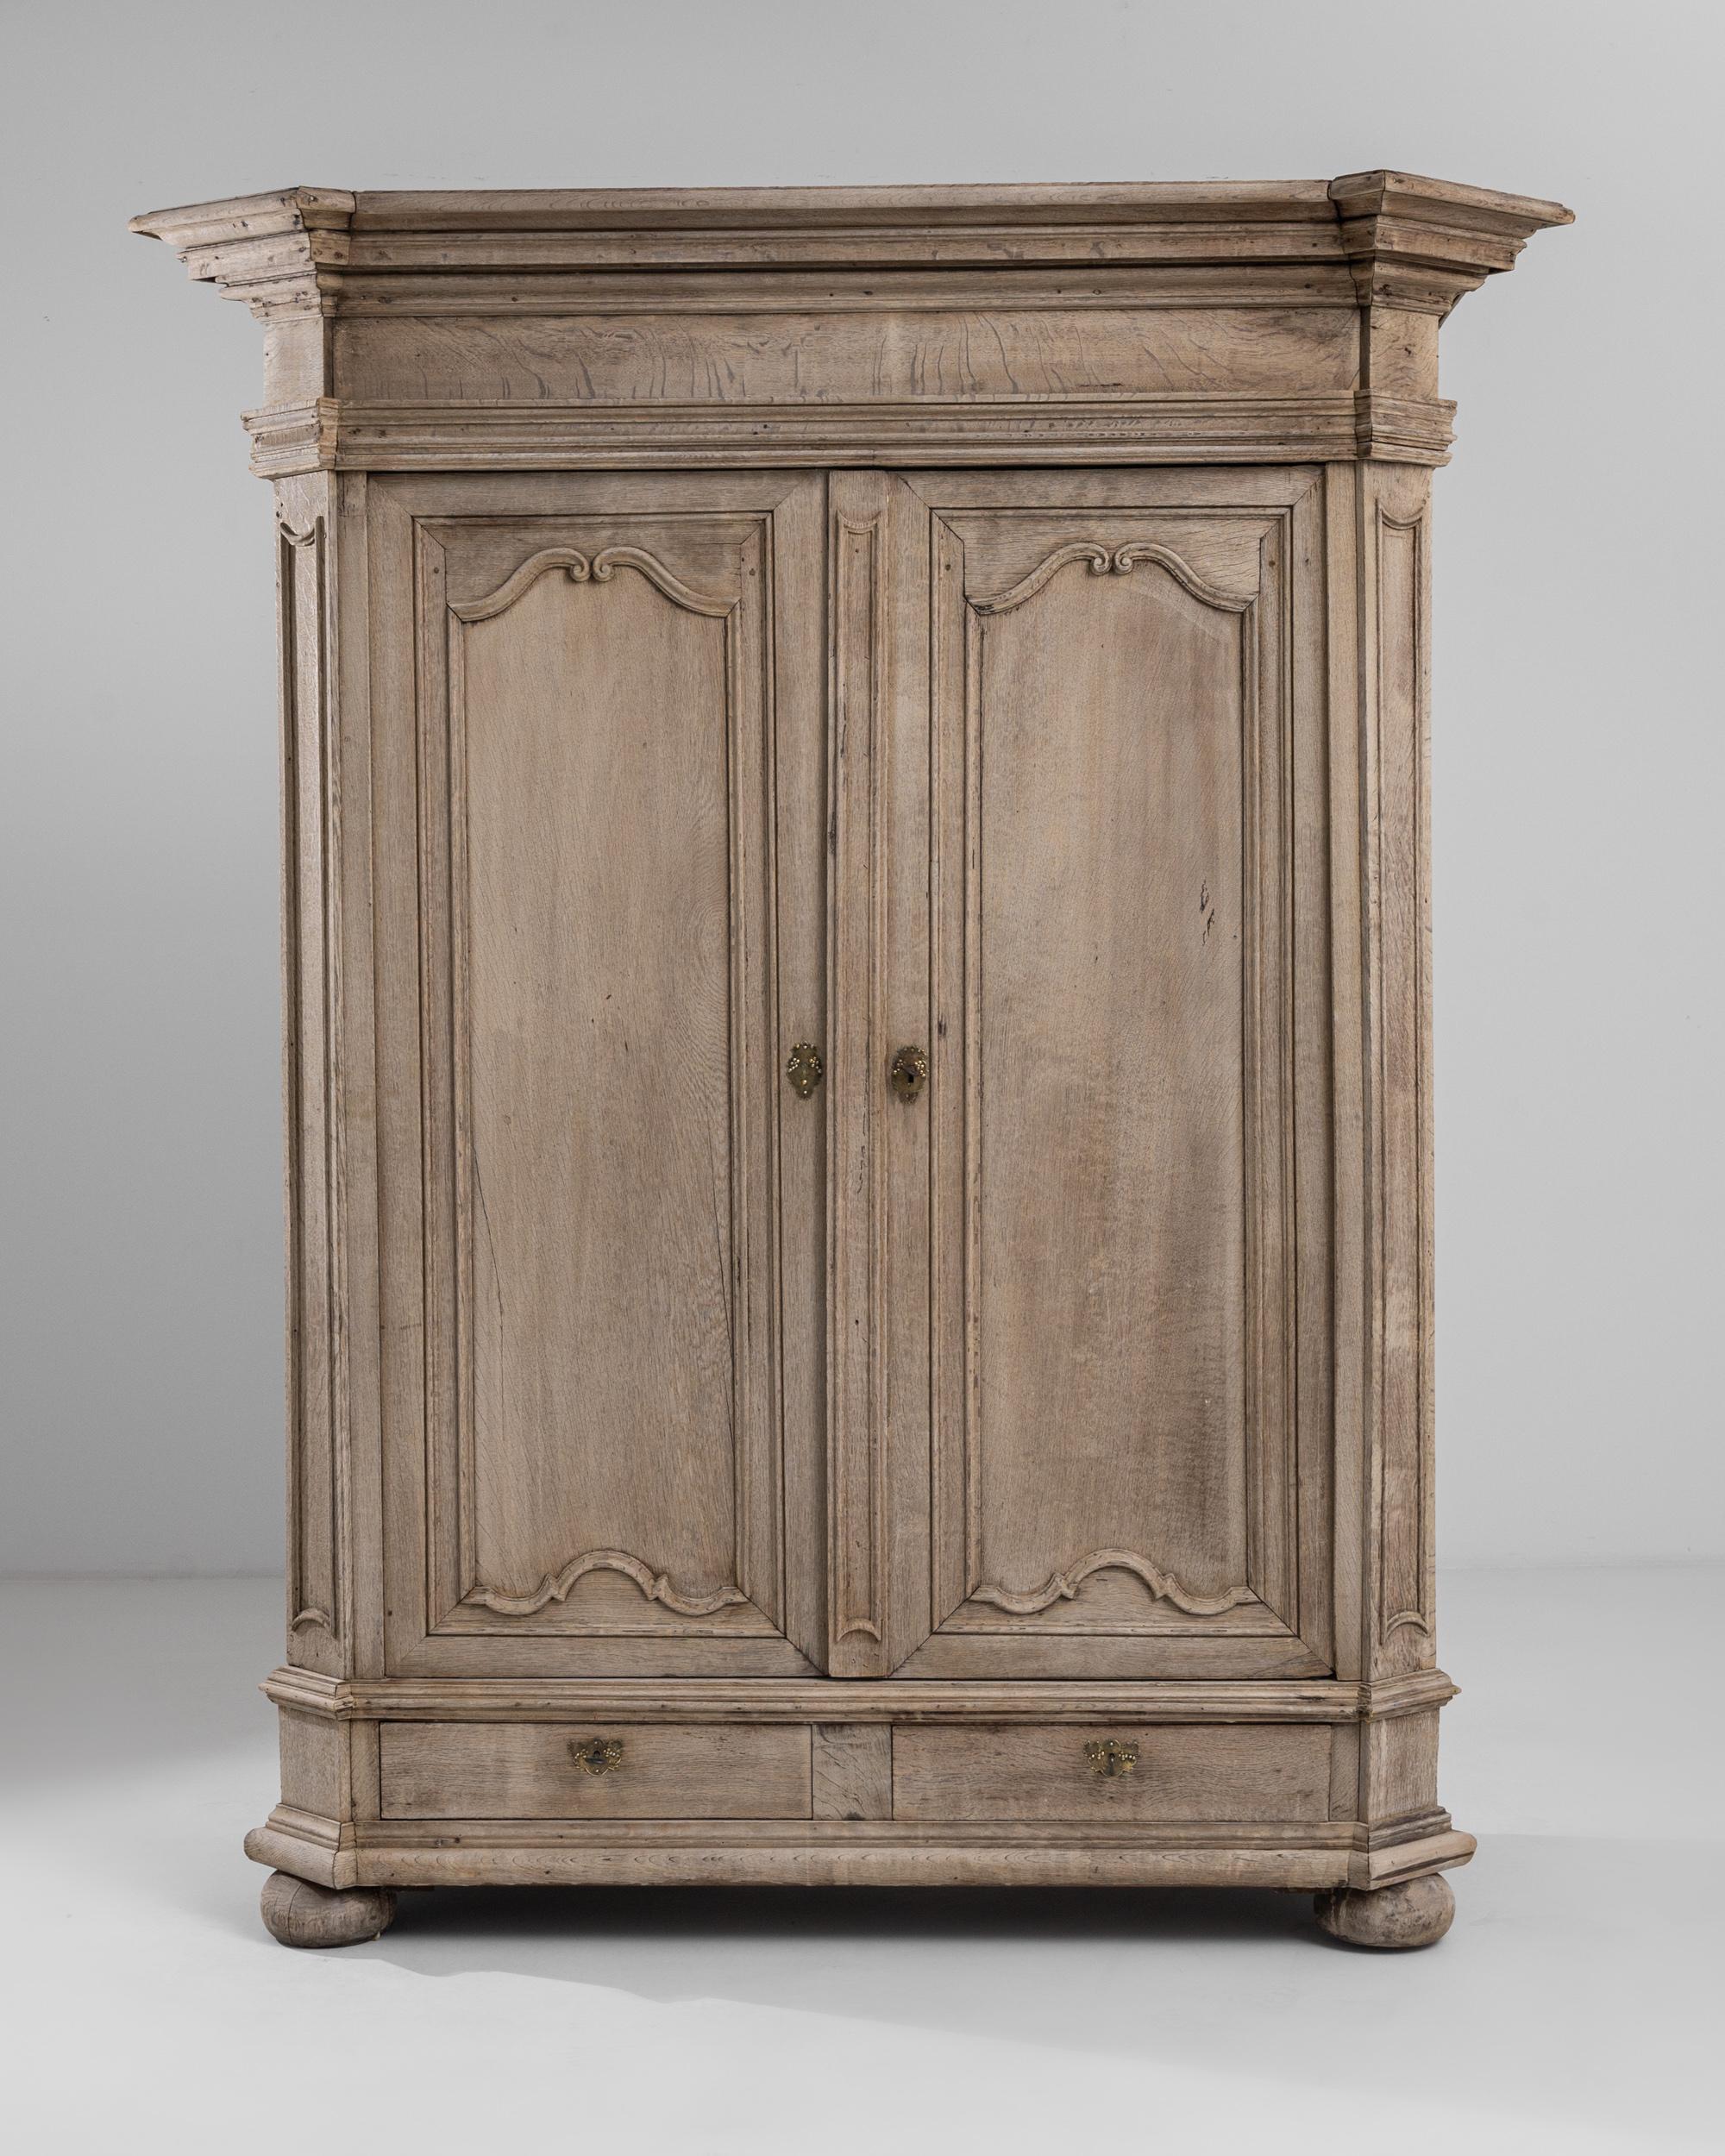 Step back in time with this exquisite 1800s French Bleached Oak Cabinet, a true masterpiece of craftsmanship and elegance. Painstakingly restored to honor its historic roots, this piece brings the charm of a French chateau into your home. With its